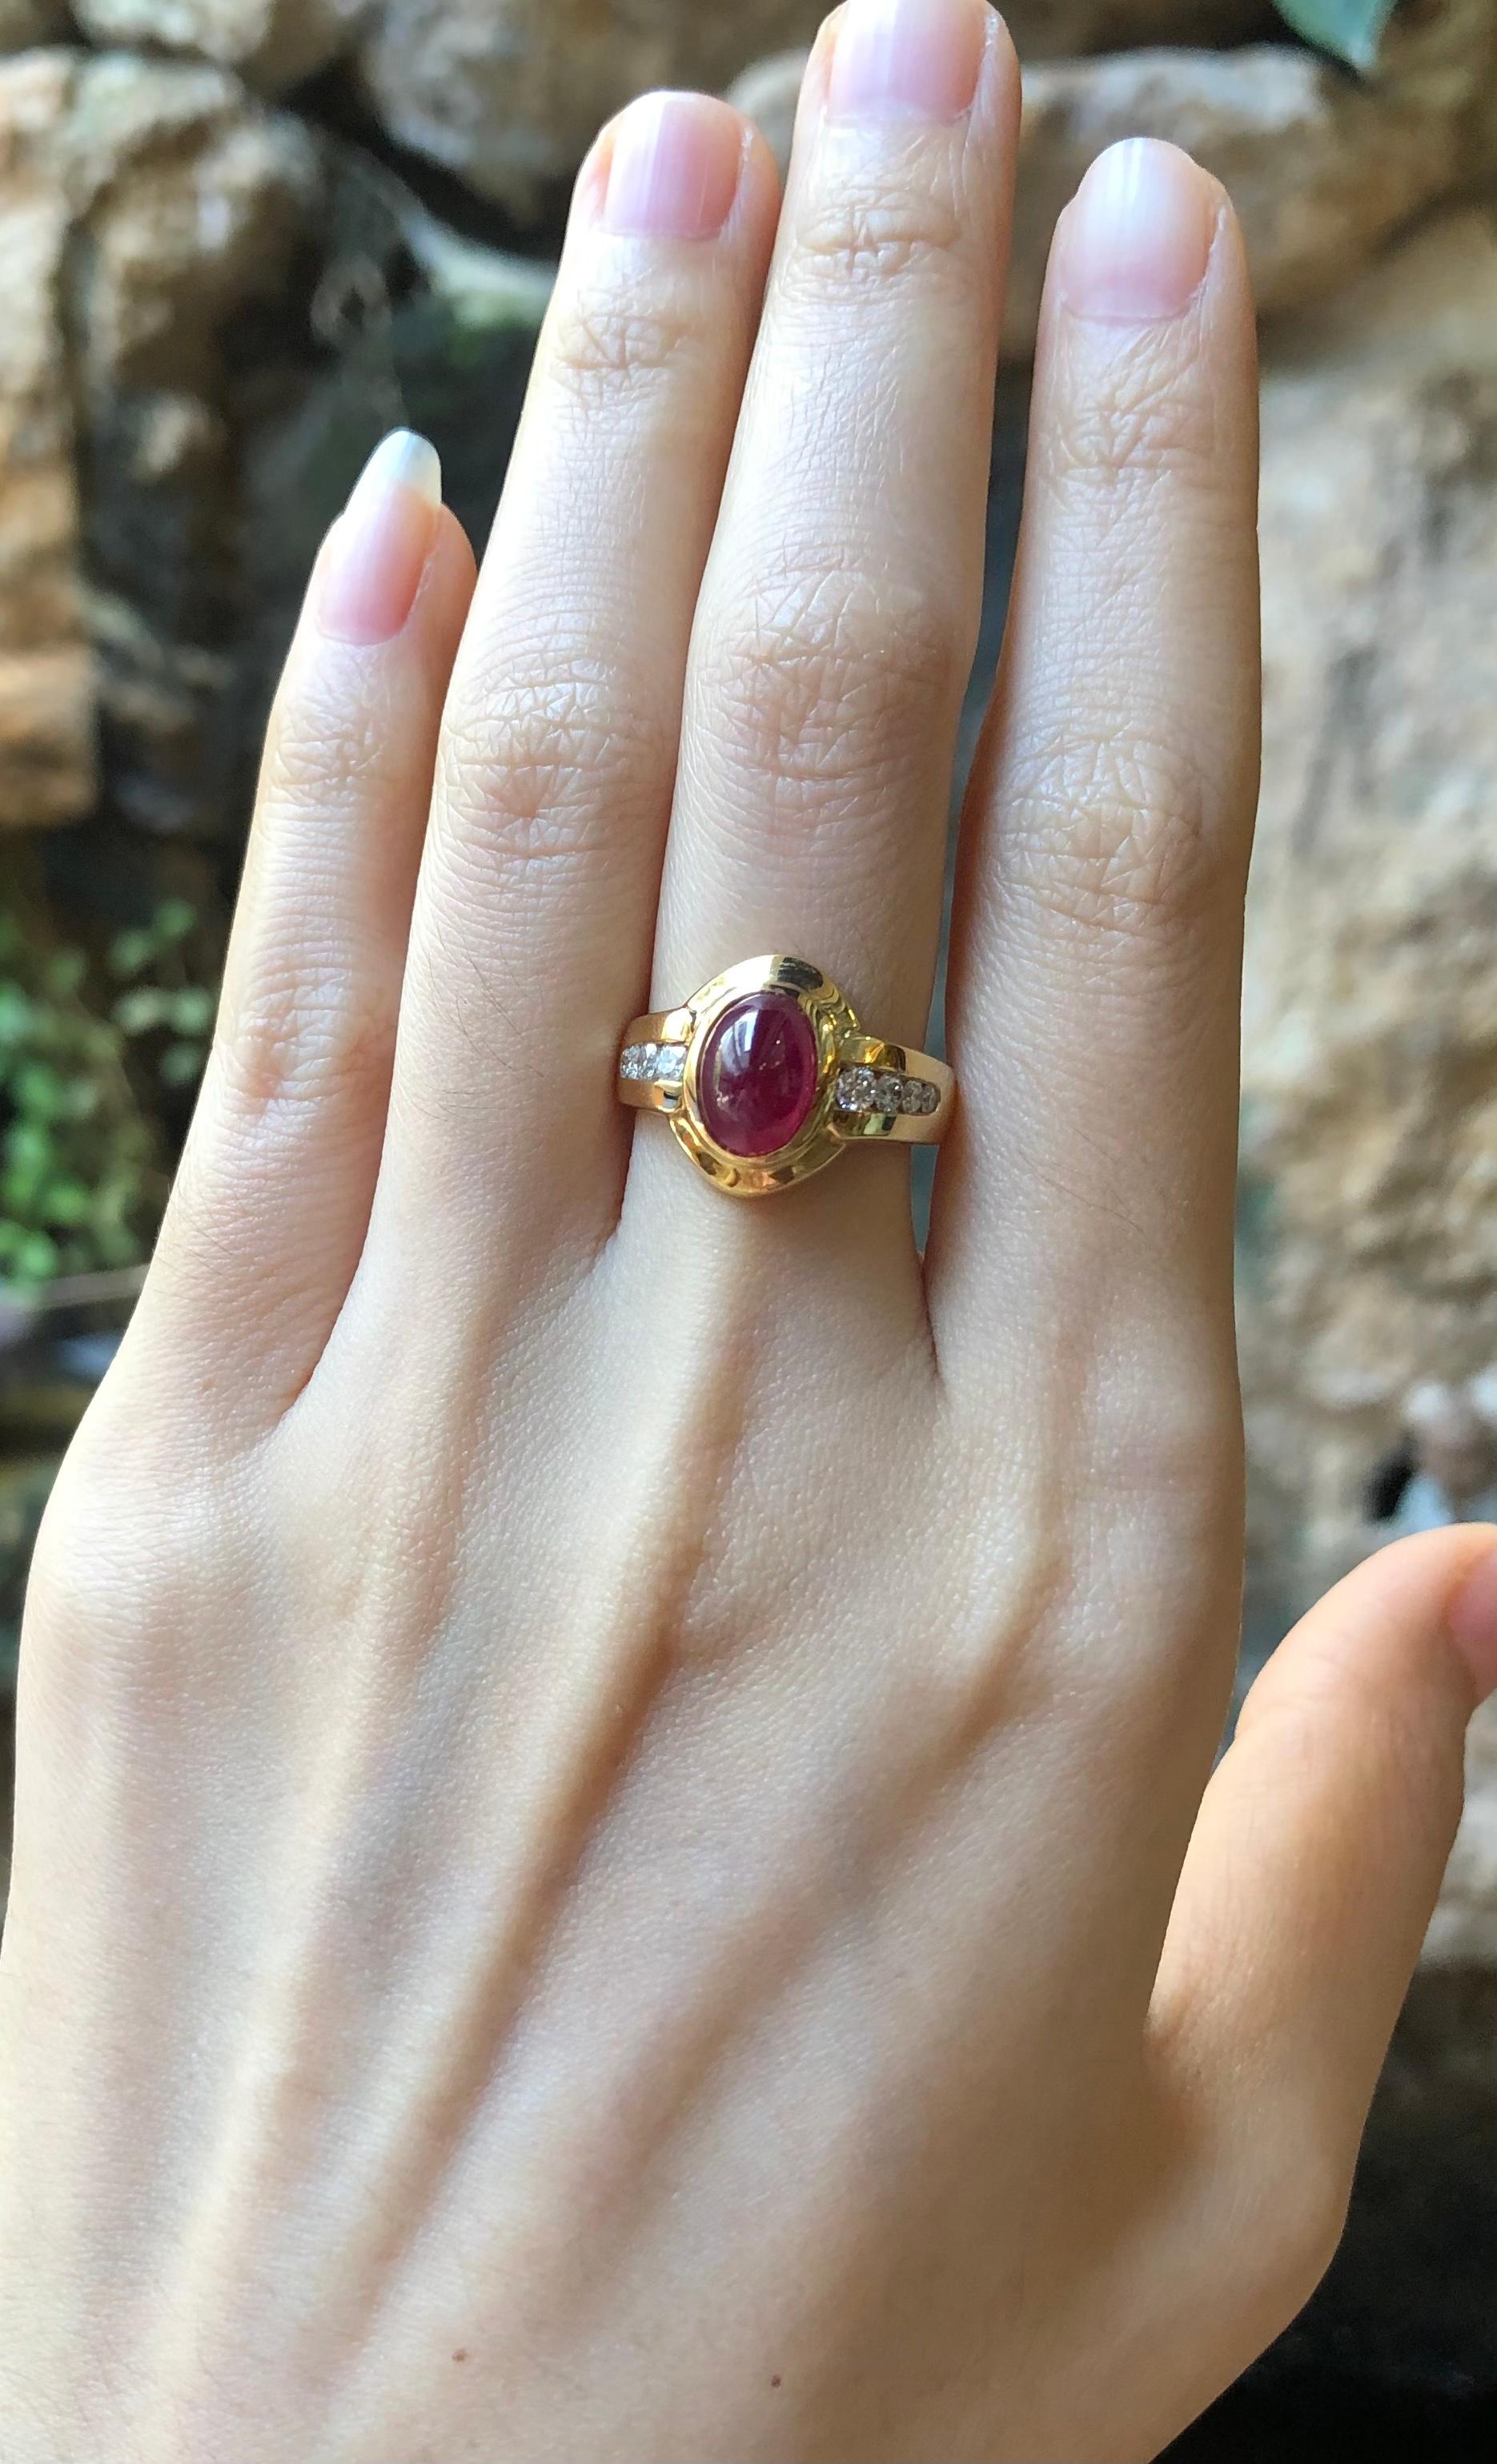 Cabochon Ruby 3.02 carats with Diamond 0.33 carat Ring set in 18 Karat Gold Settings

Width:  0.9 cm 
Length: 1.4 cm
Ring Size: 54
Total Weight: 7.07 grams

